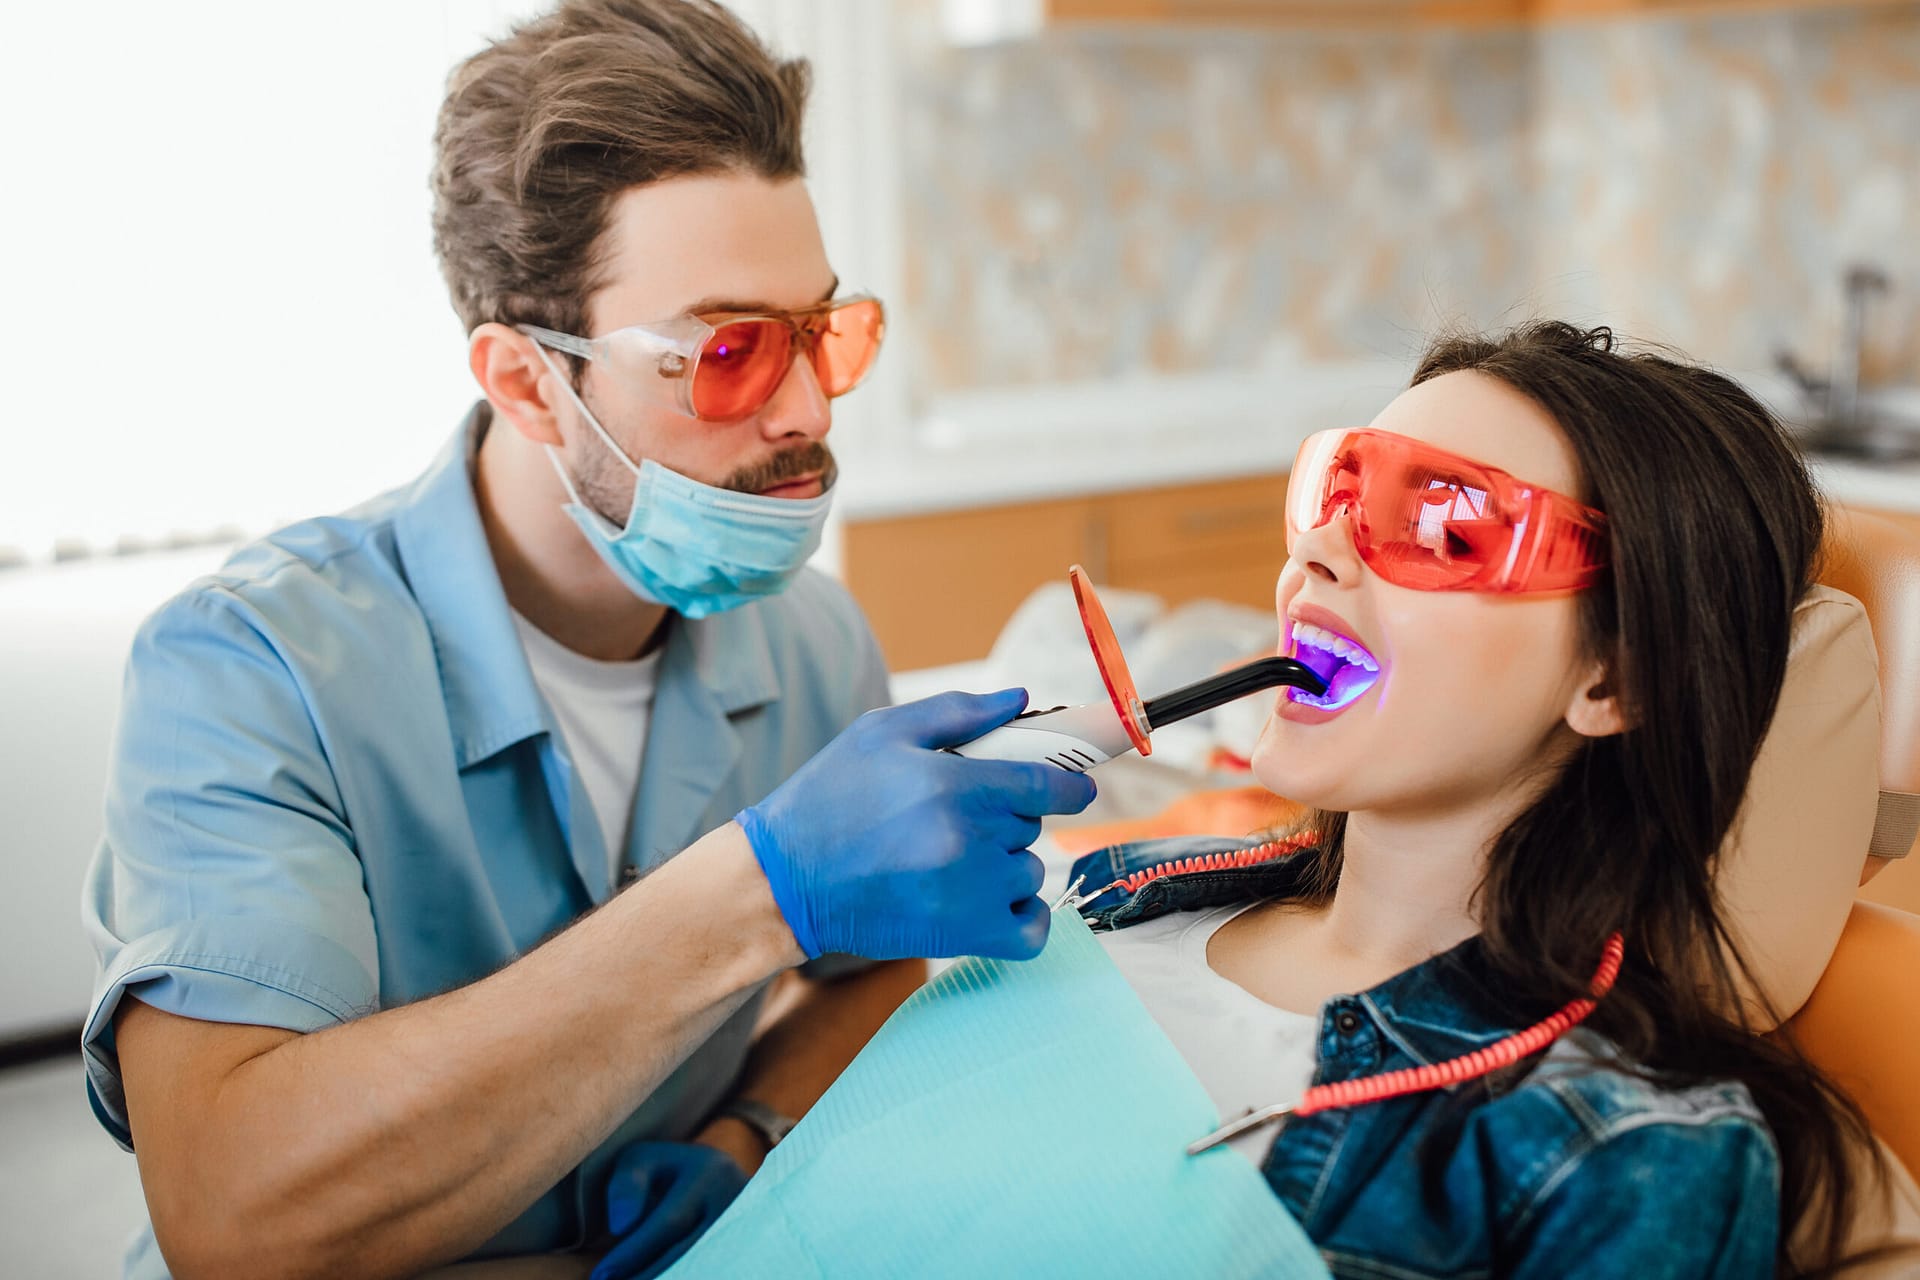 Waterdown's Game-Changing Laser Dentistry Services